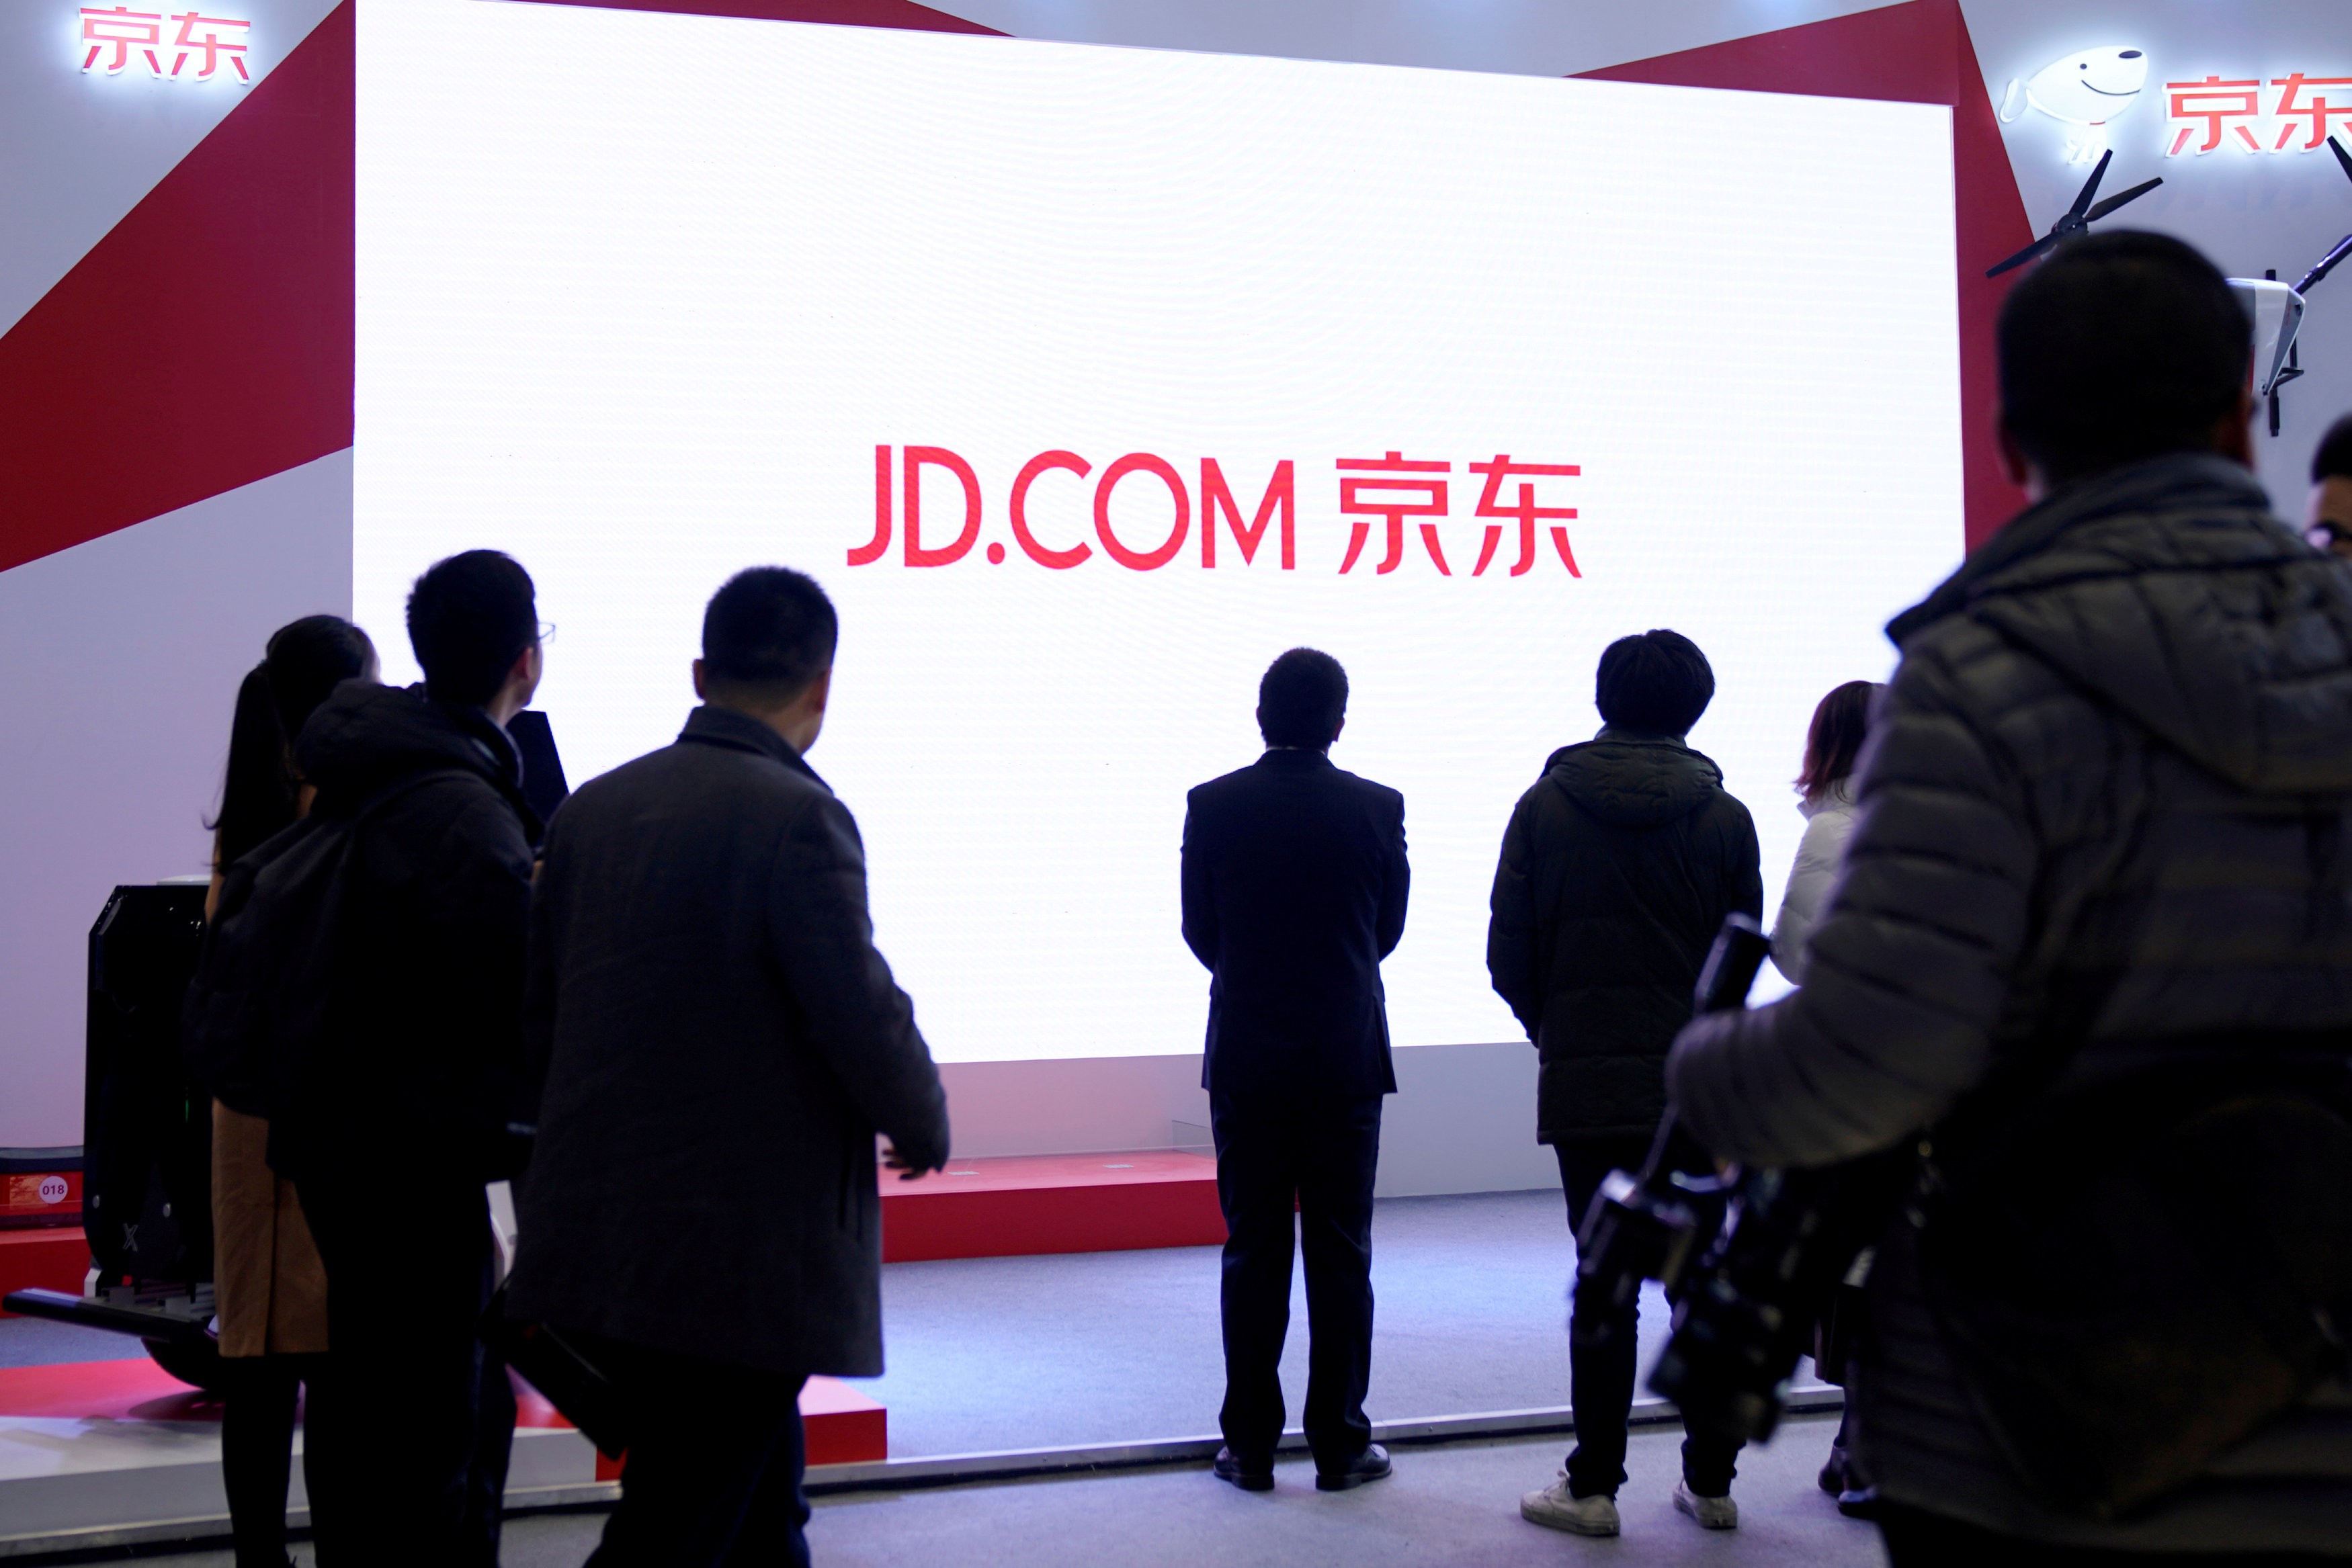 Chinese online retailer JD.com has been accelerating its push into developing AI-driven technologies. Photo: Reuters